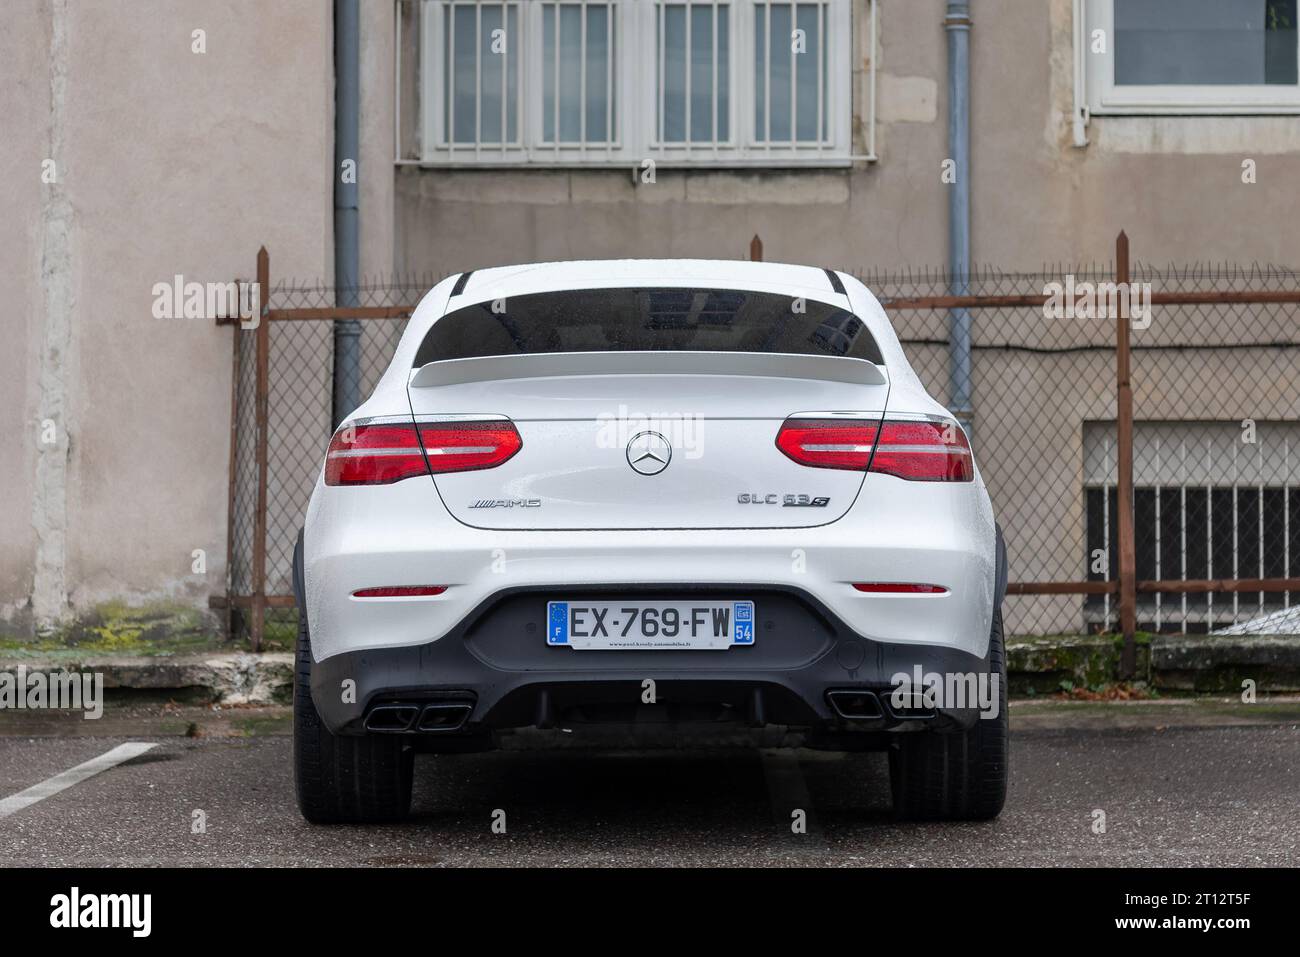 White Mercedes-AMG GLC 63 S Coupe parked in a street Stock Photo